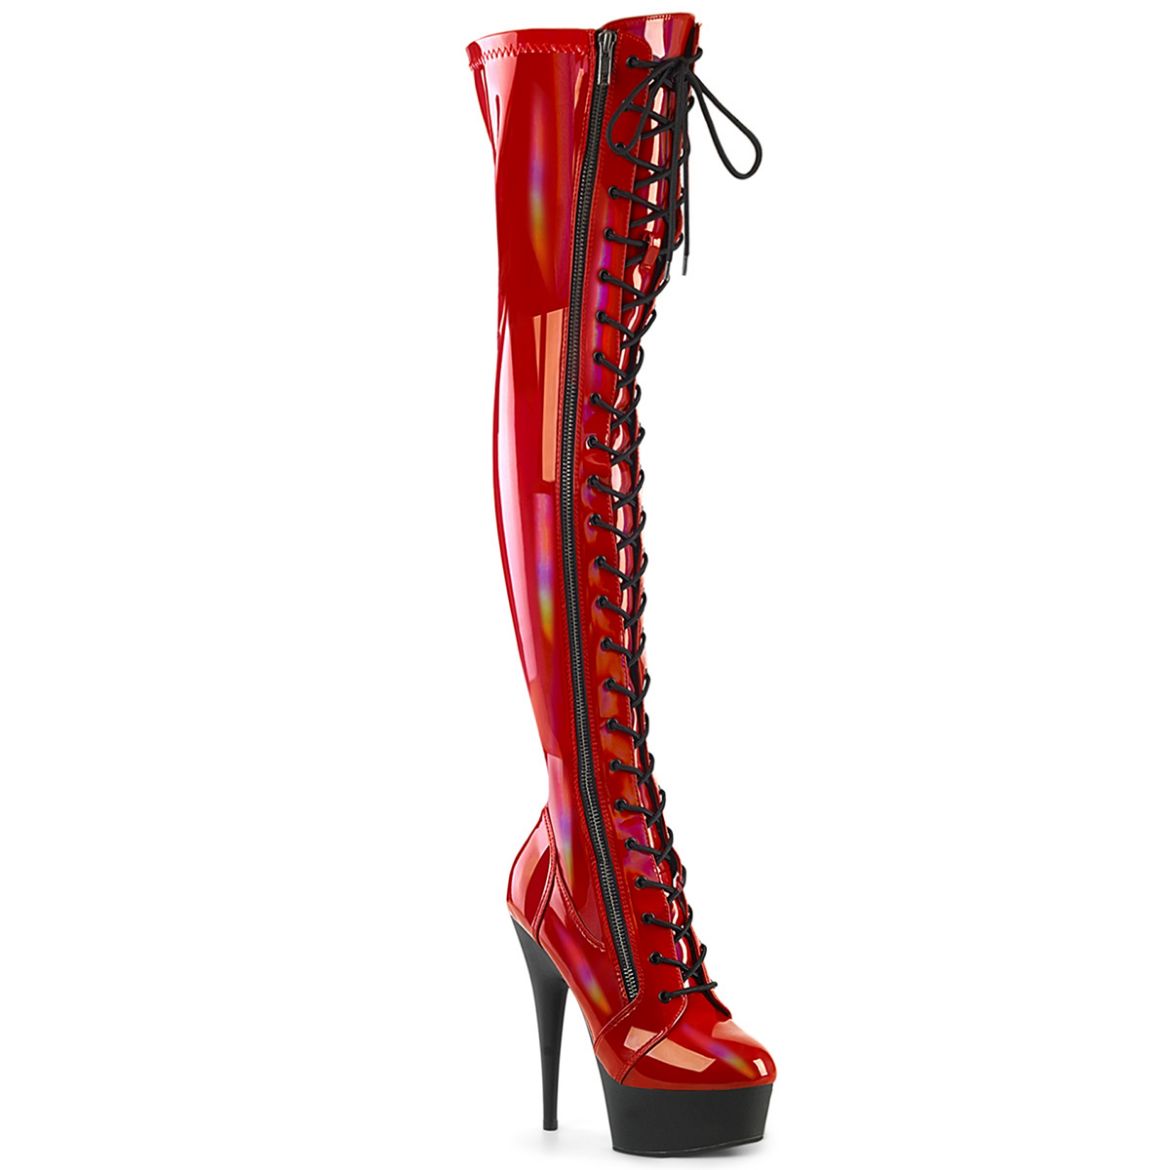 Product image of Pleaser DELIGHT-3029 Red Str Hologram Pat/Blk Matte 6 Inch Heel 1 3/4 Inch PF Stretch Lace-Up OTK Boot Outer Zip